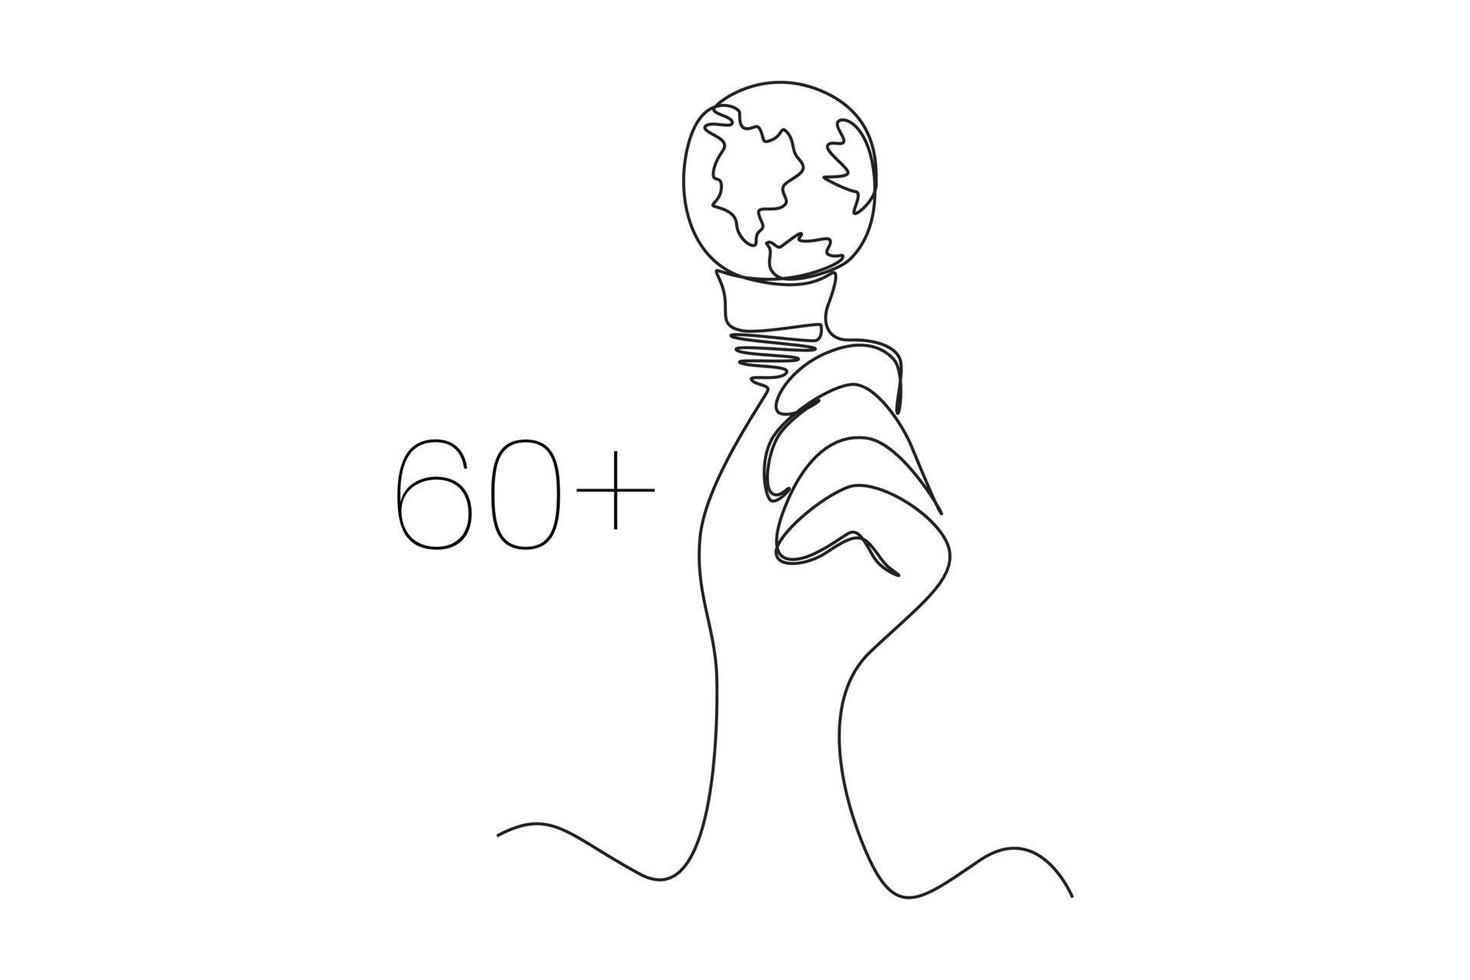 Single one line drawing hand hold light bulb with earth inside. Earth hour concept. Continuous line draw design graphic vector illustration.